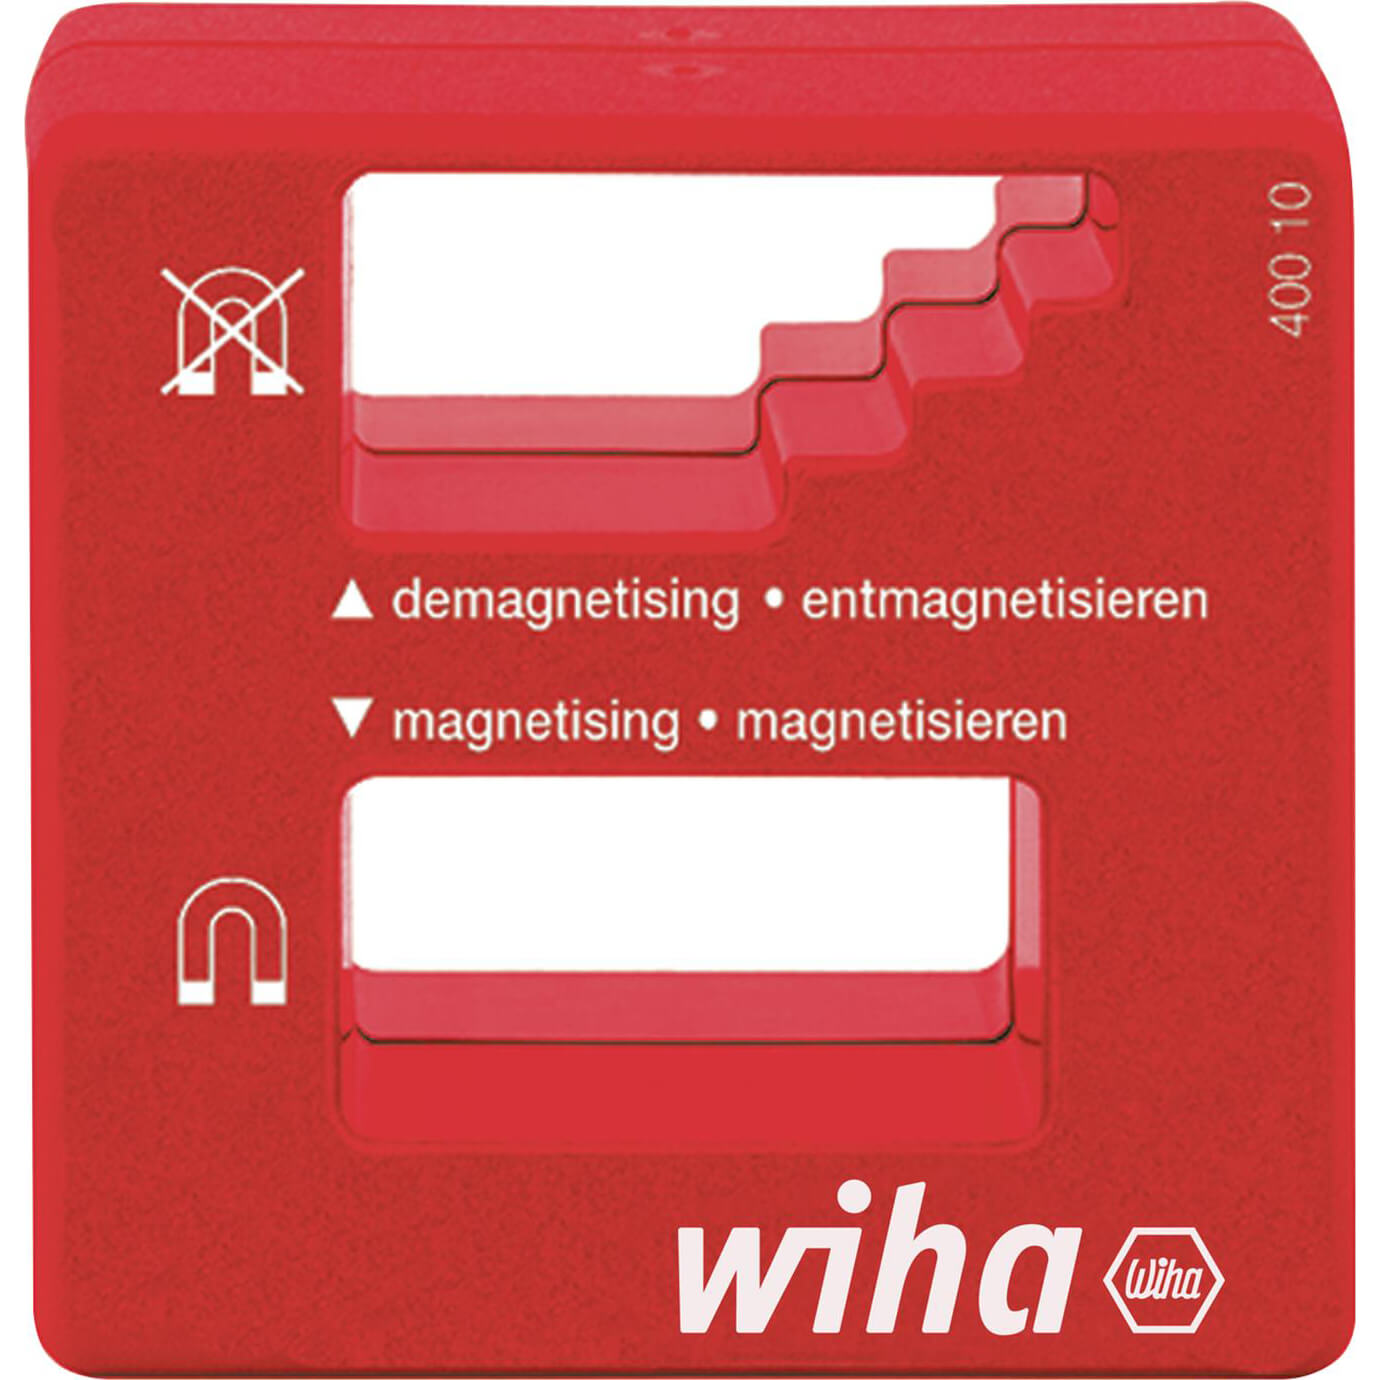 Photos - Other Hand Tools Wiha Magnetiser and Demagnetiser 02568 